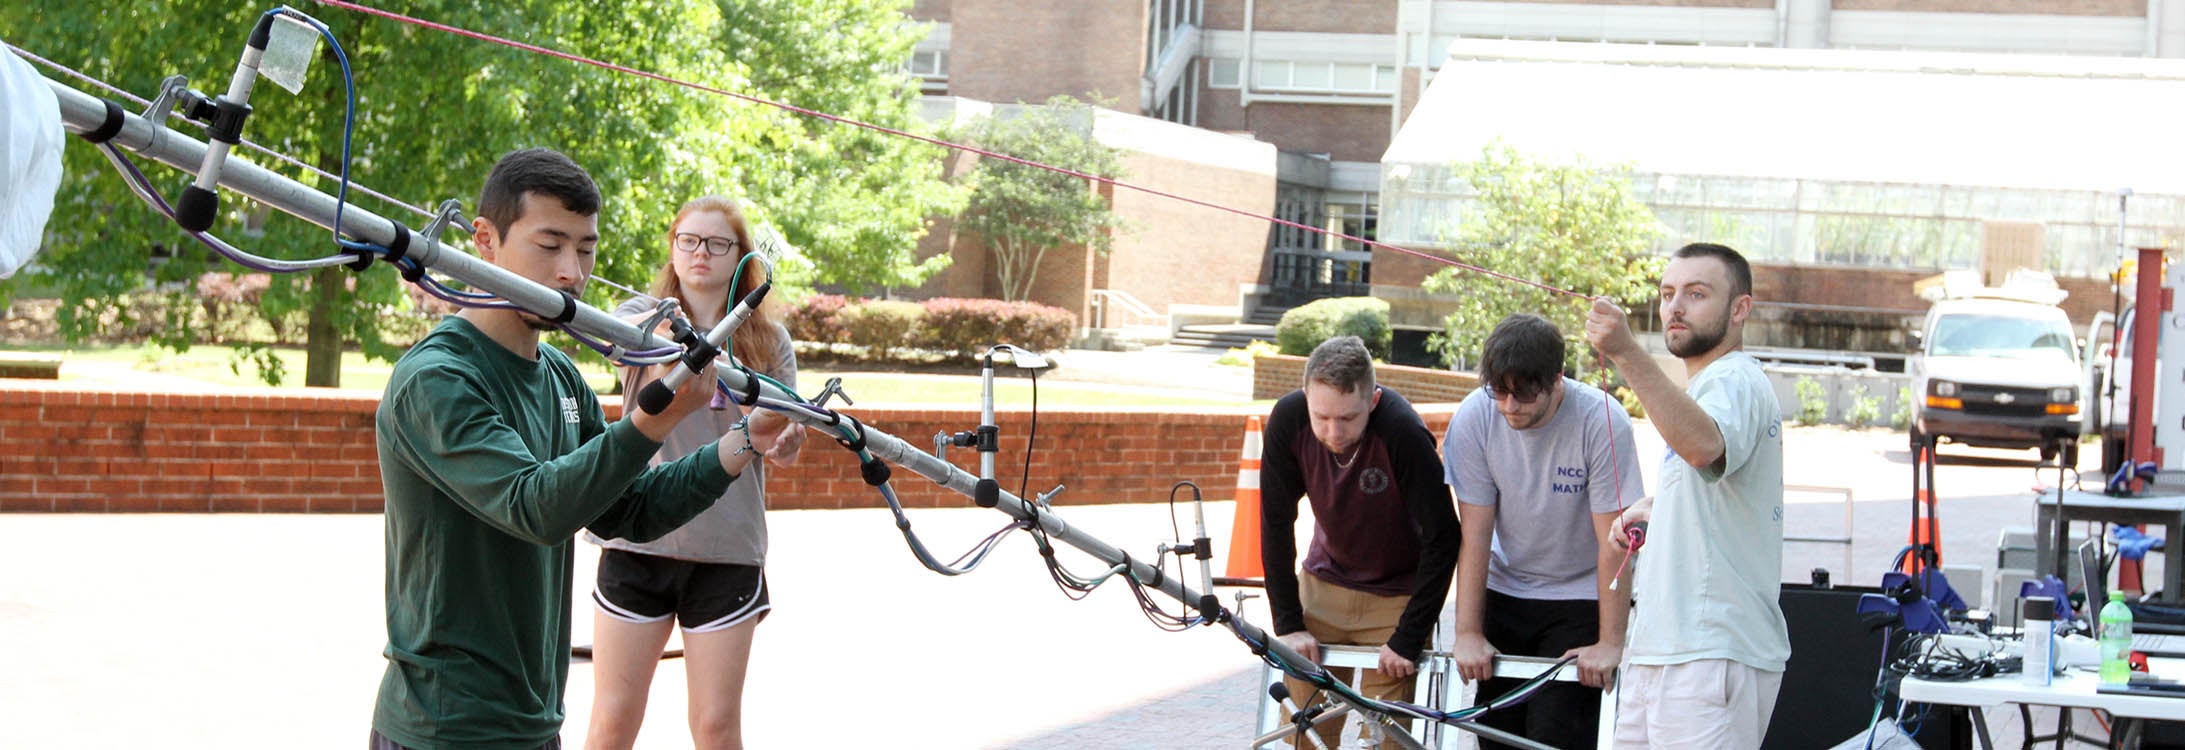 Research students check sound equipment on campus in May. Dr. Teresa Ryan is conducting sound propagation research for the Navy and received a $370,000 grant from the Office of Naval Research to continue her work. (Photo by Ken Buday)